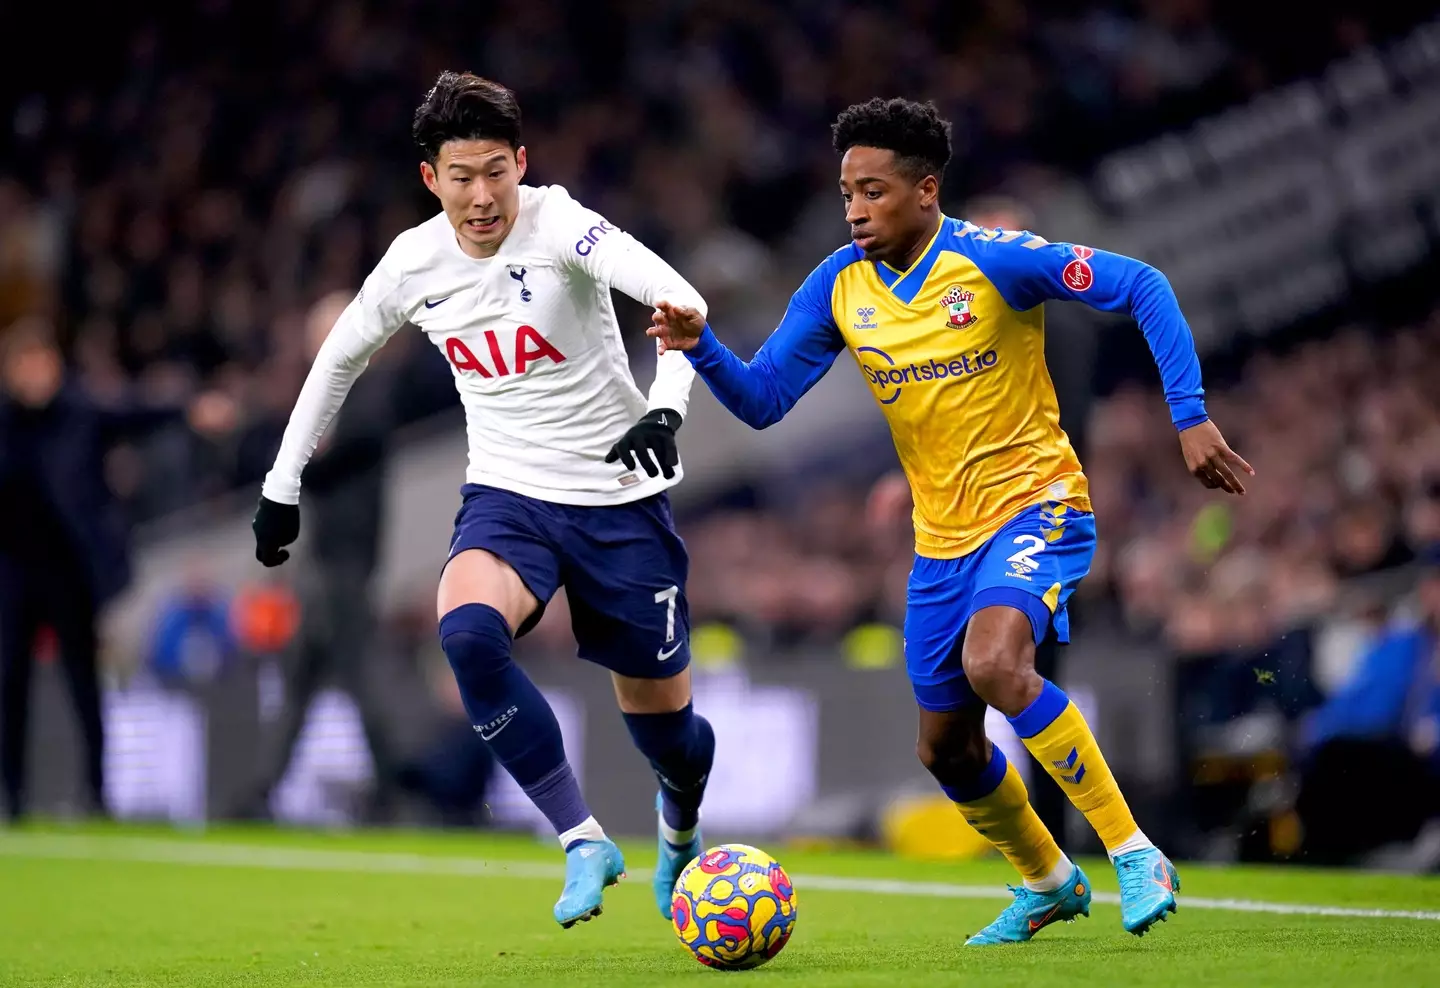 Southampton came from behind to beat Tottenham on Wednesday (Image: Alamy)